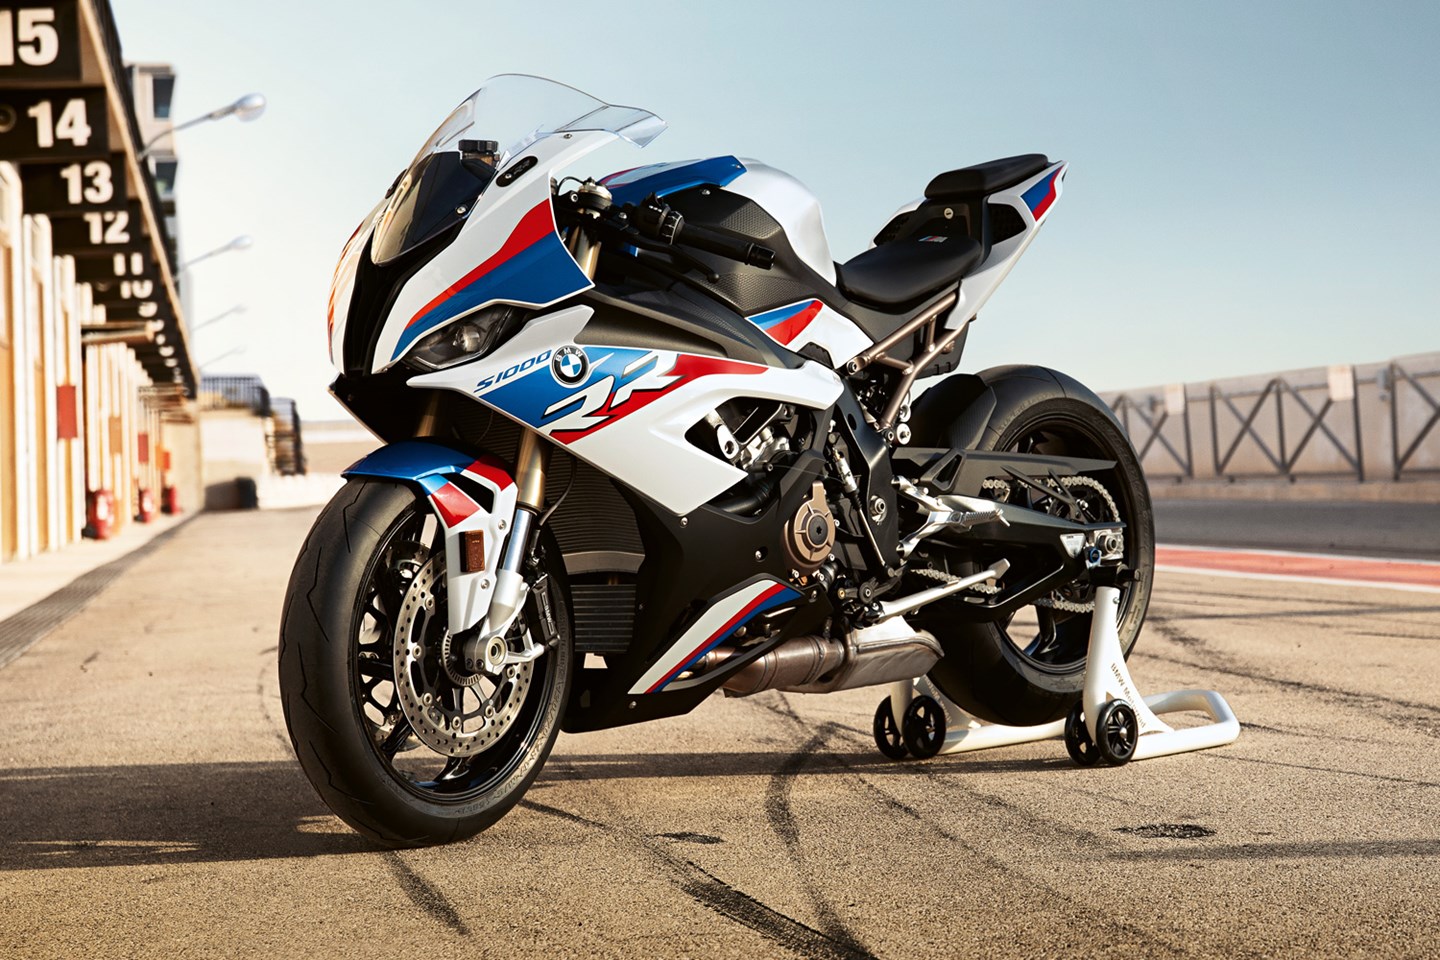 bmw_s1000rr_1.jpg?mode=max&quality=90&scale=down